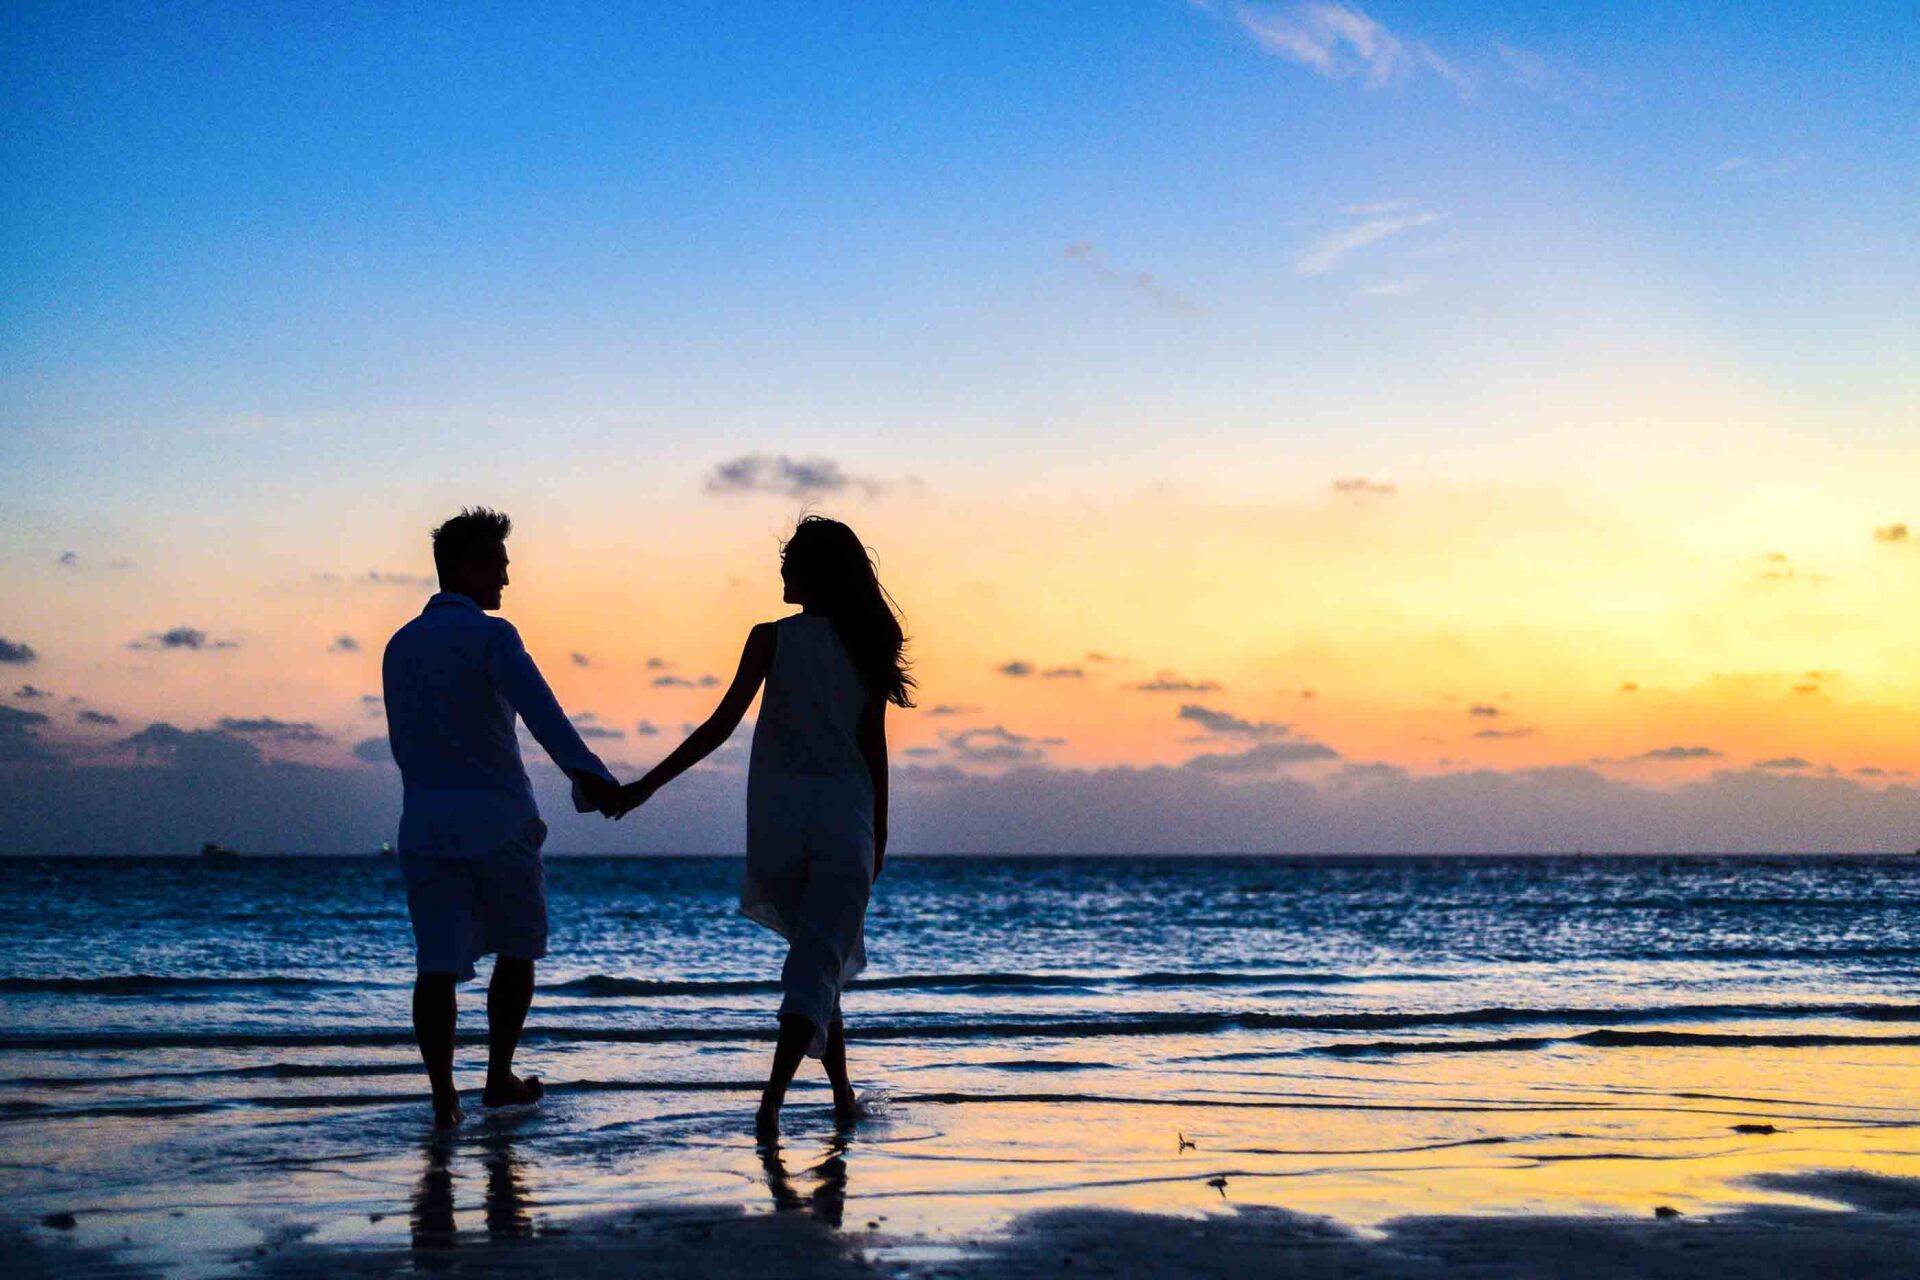 A man and a woman are holding hands on the beach at sunset.